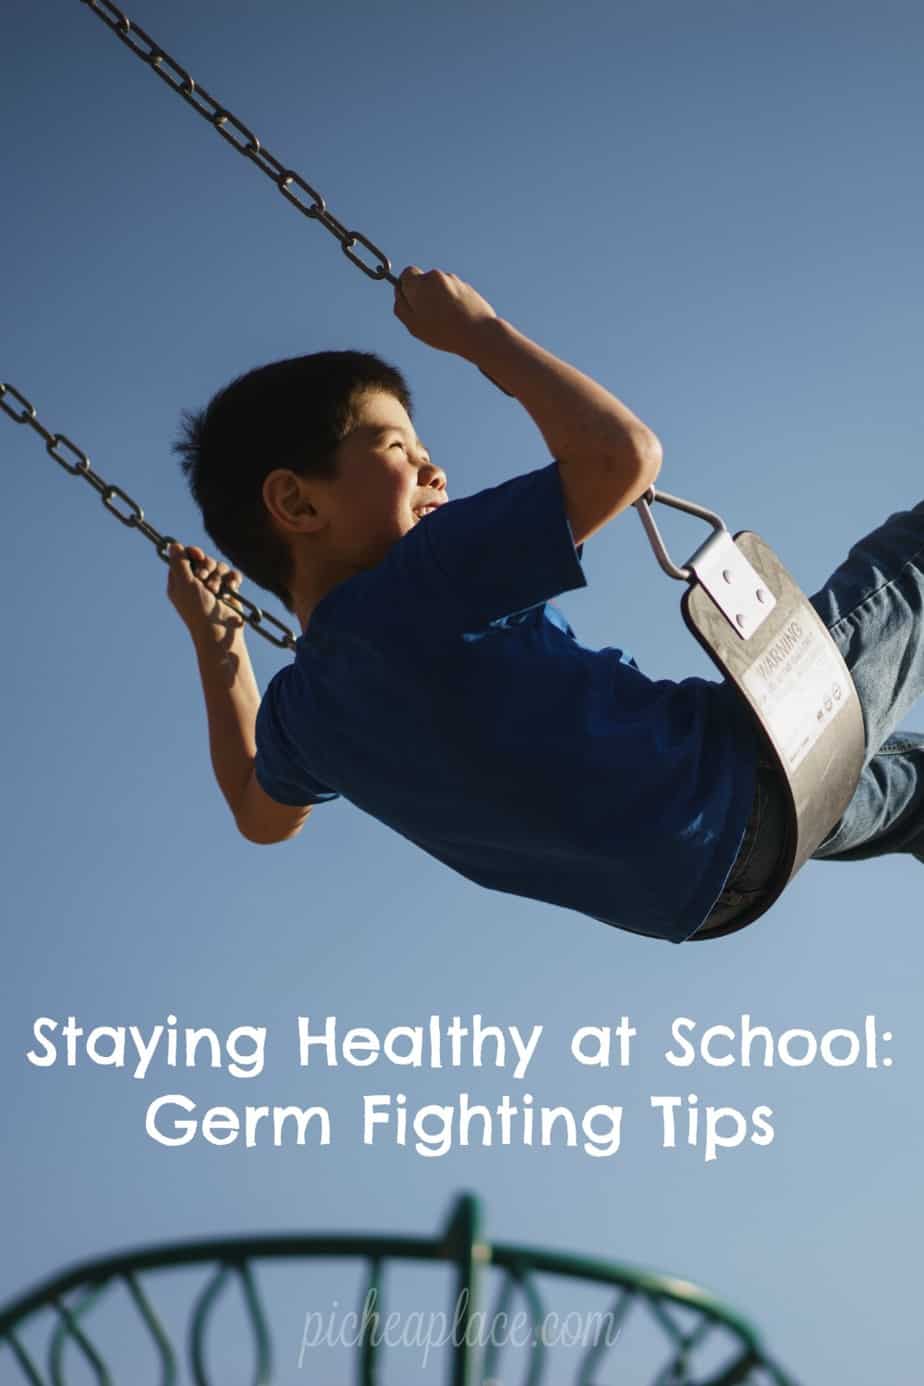 Staying healthy during the busy back-to-school season can be a challenge, but armed with a few germ fighting tips, it is doable!